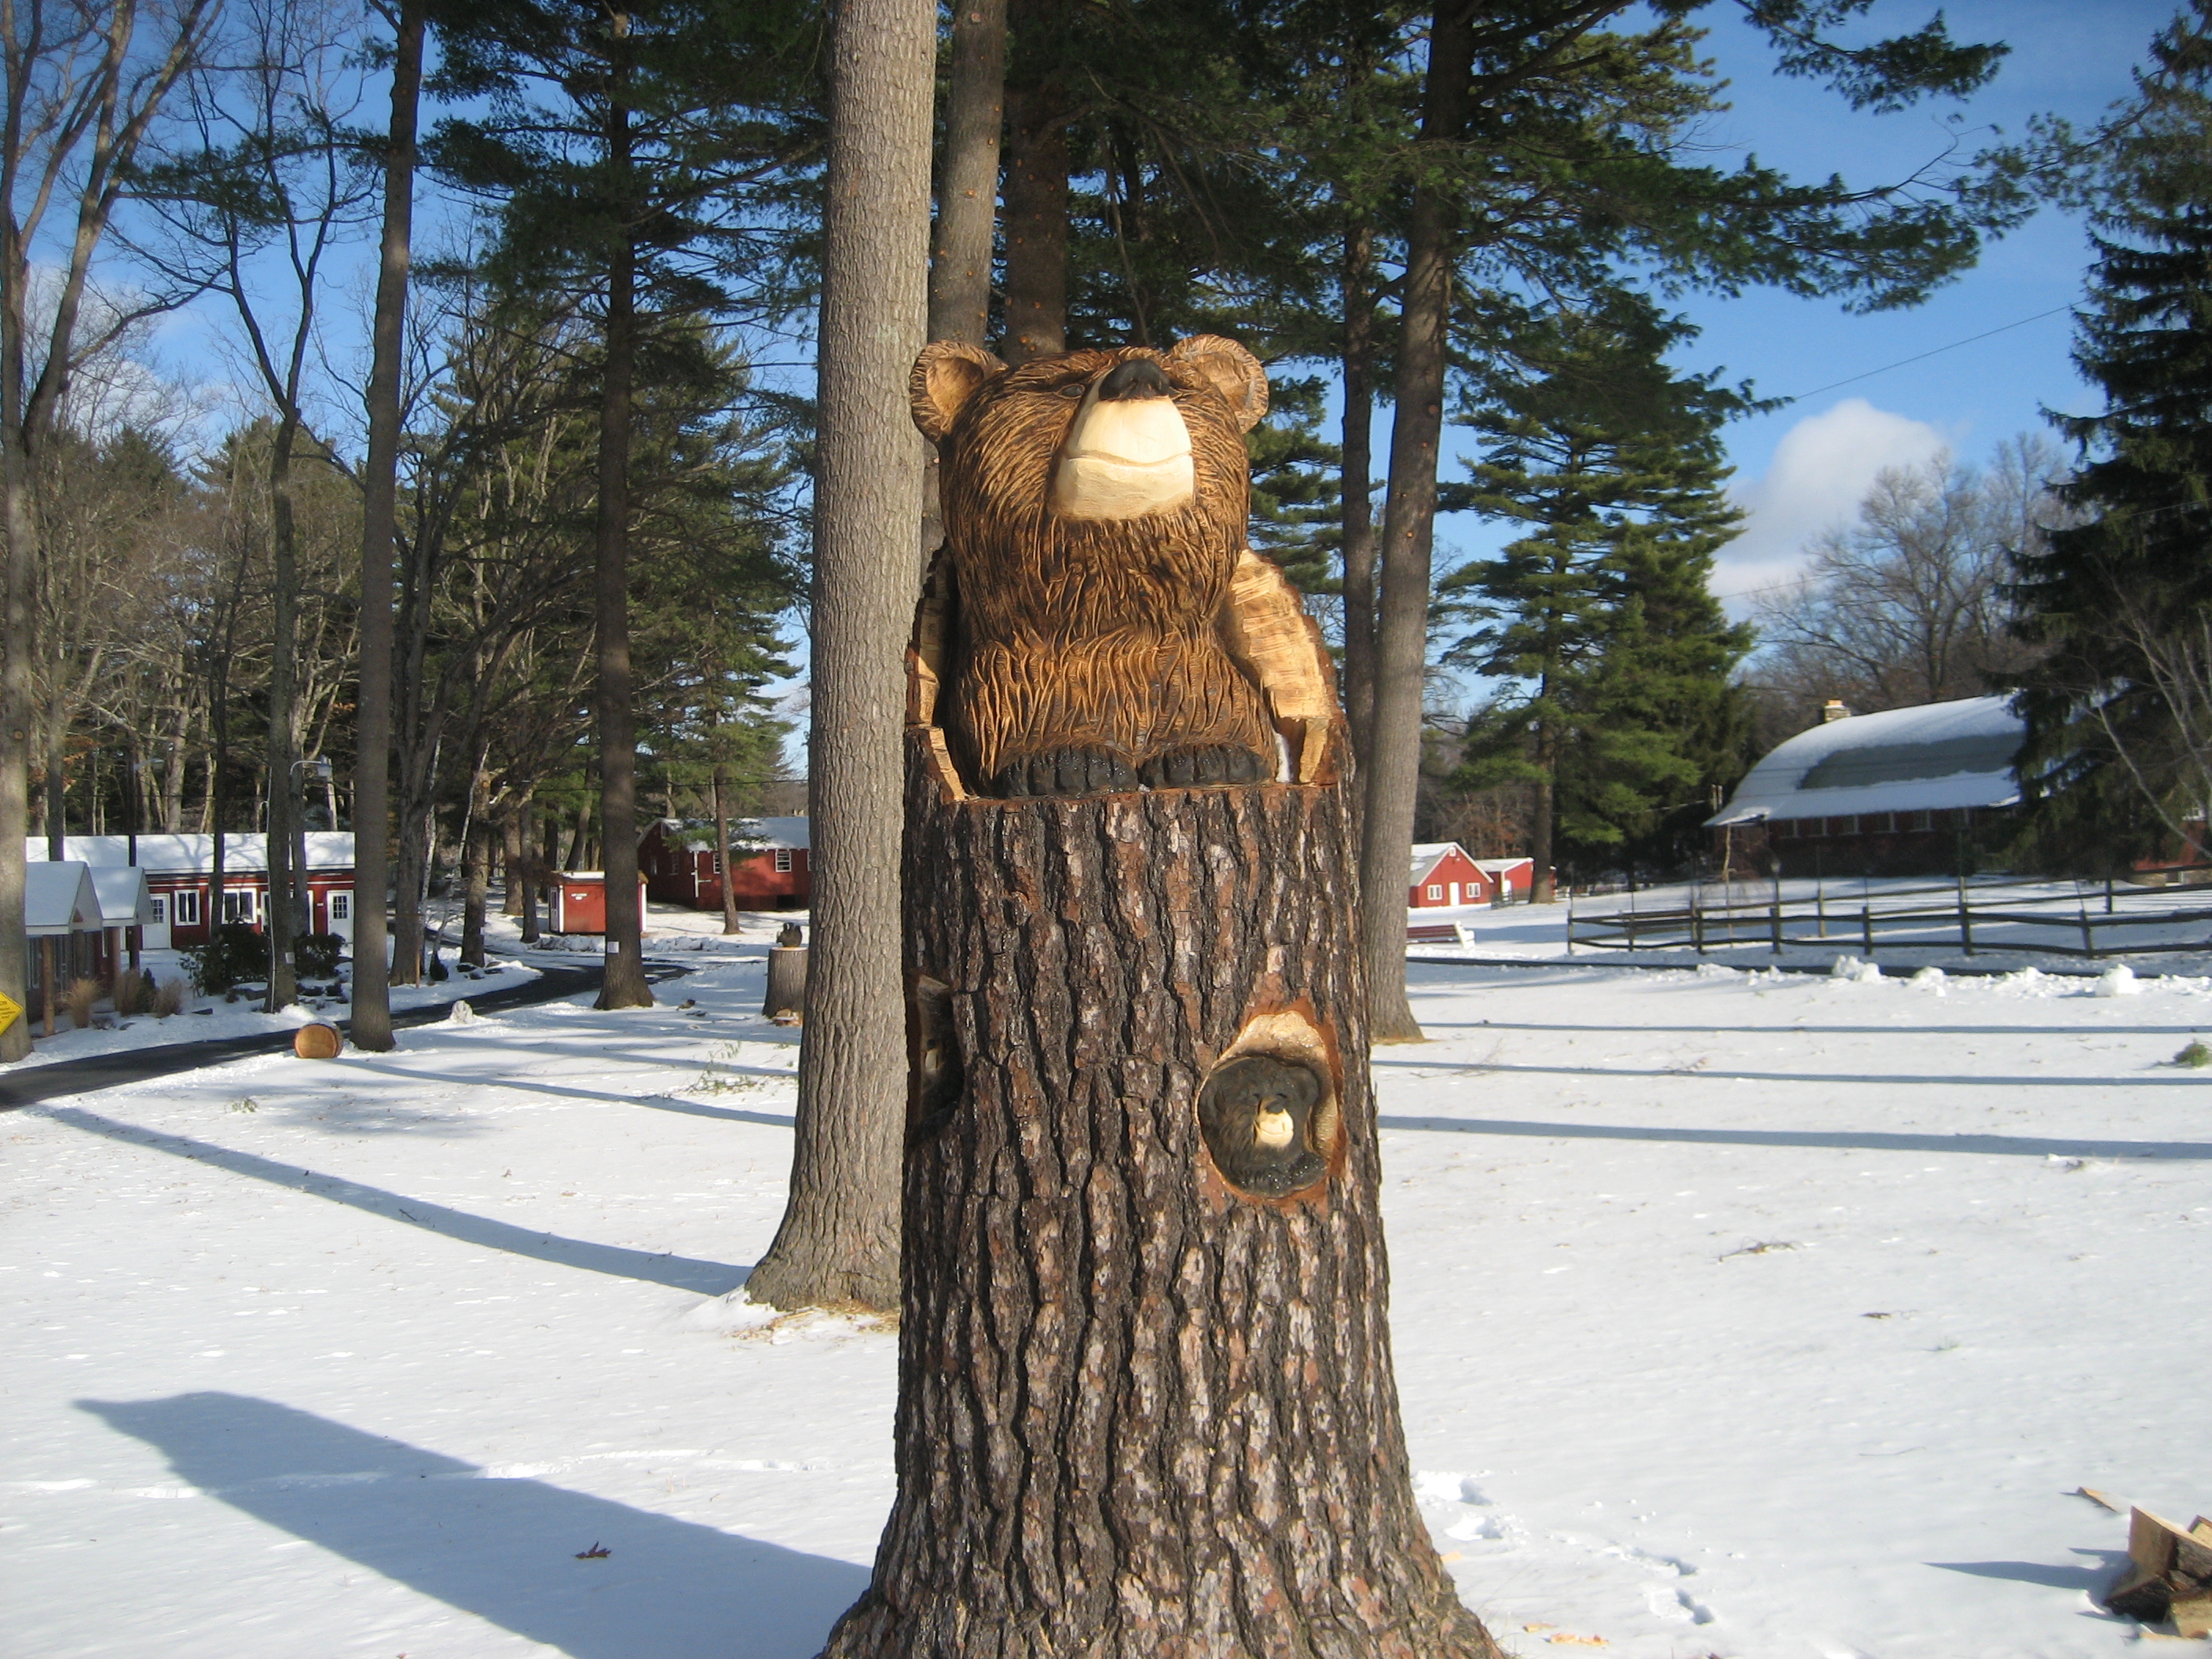 New bear in the grove. See the little baby bear in the tree.